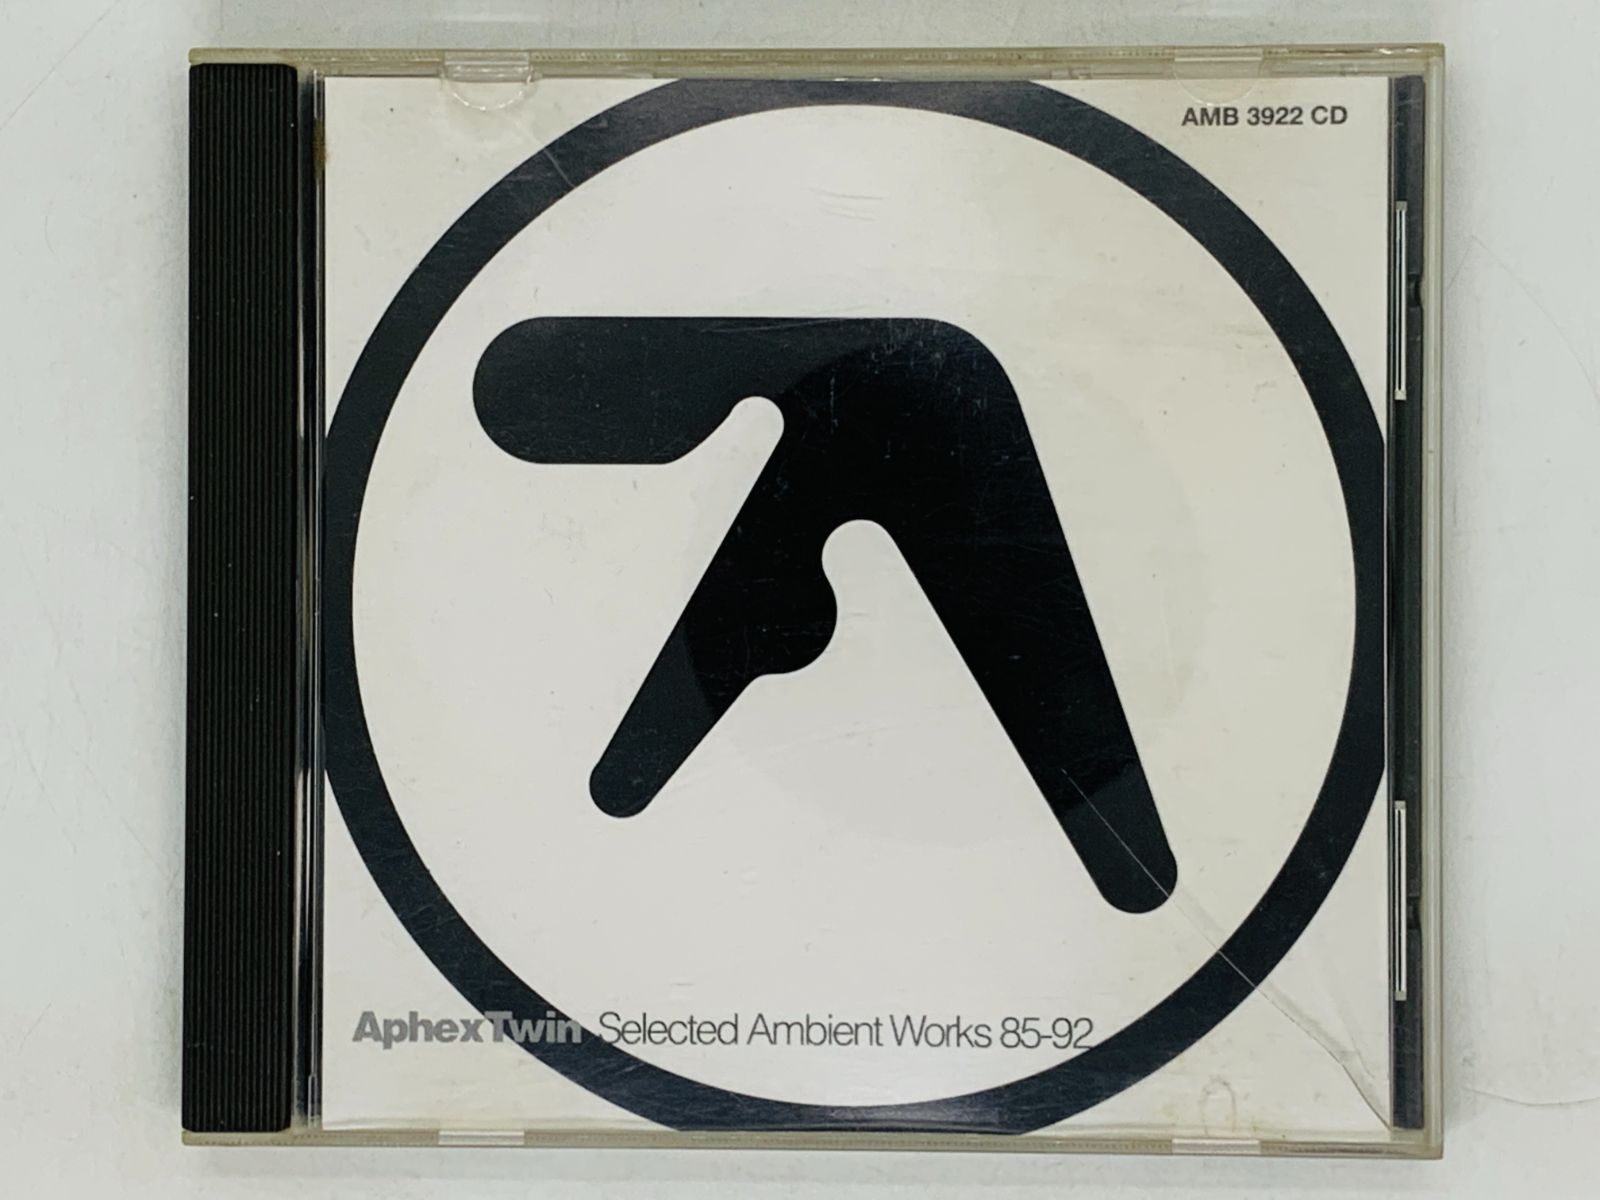 Aphex Twin Selected Ambient Works 85-92 レコード LP エイフェックス